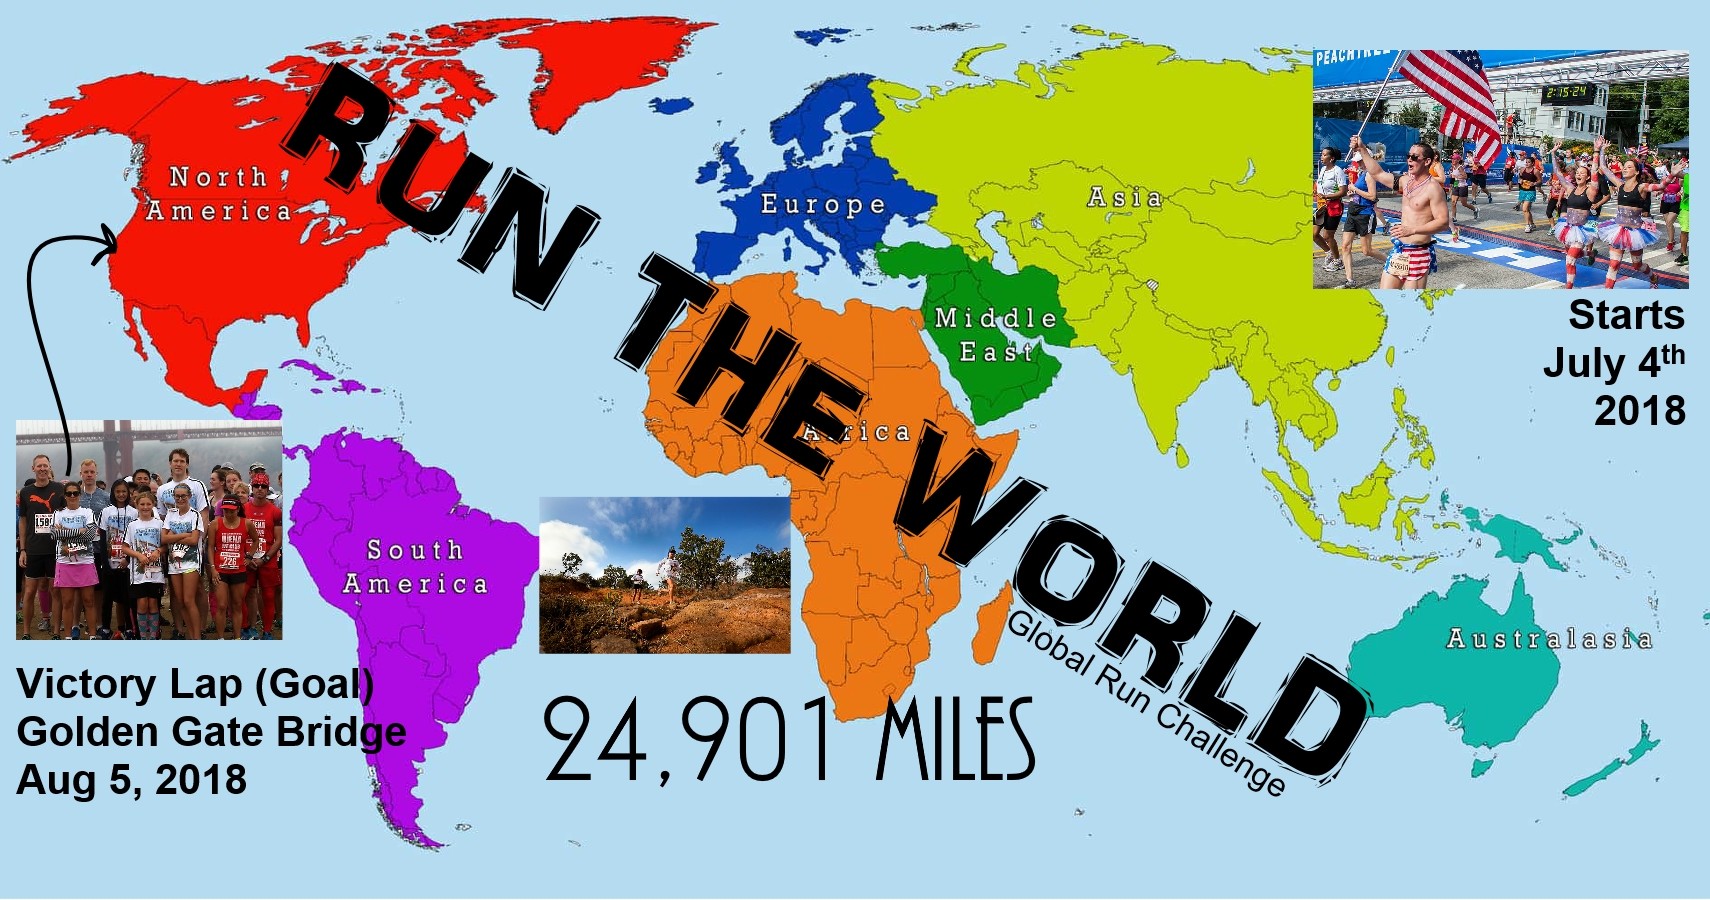 If you love running and would like to show the world, this 24,901 mile challenge circling the world is for you